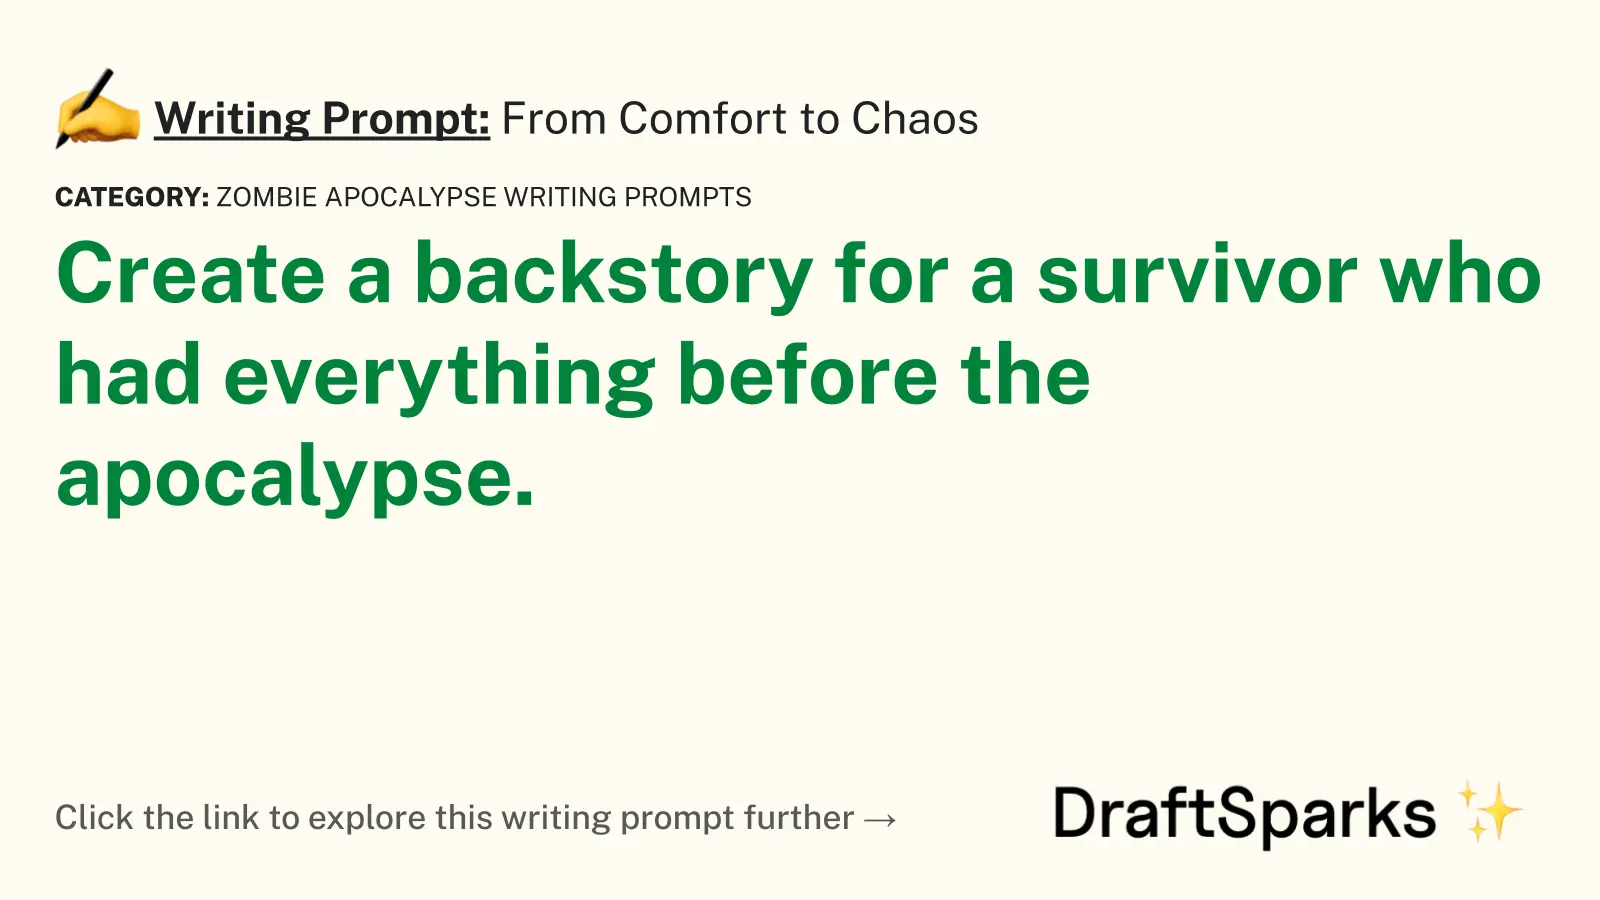 From Comfort to Chaos